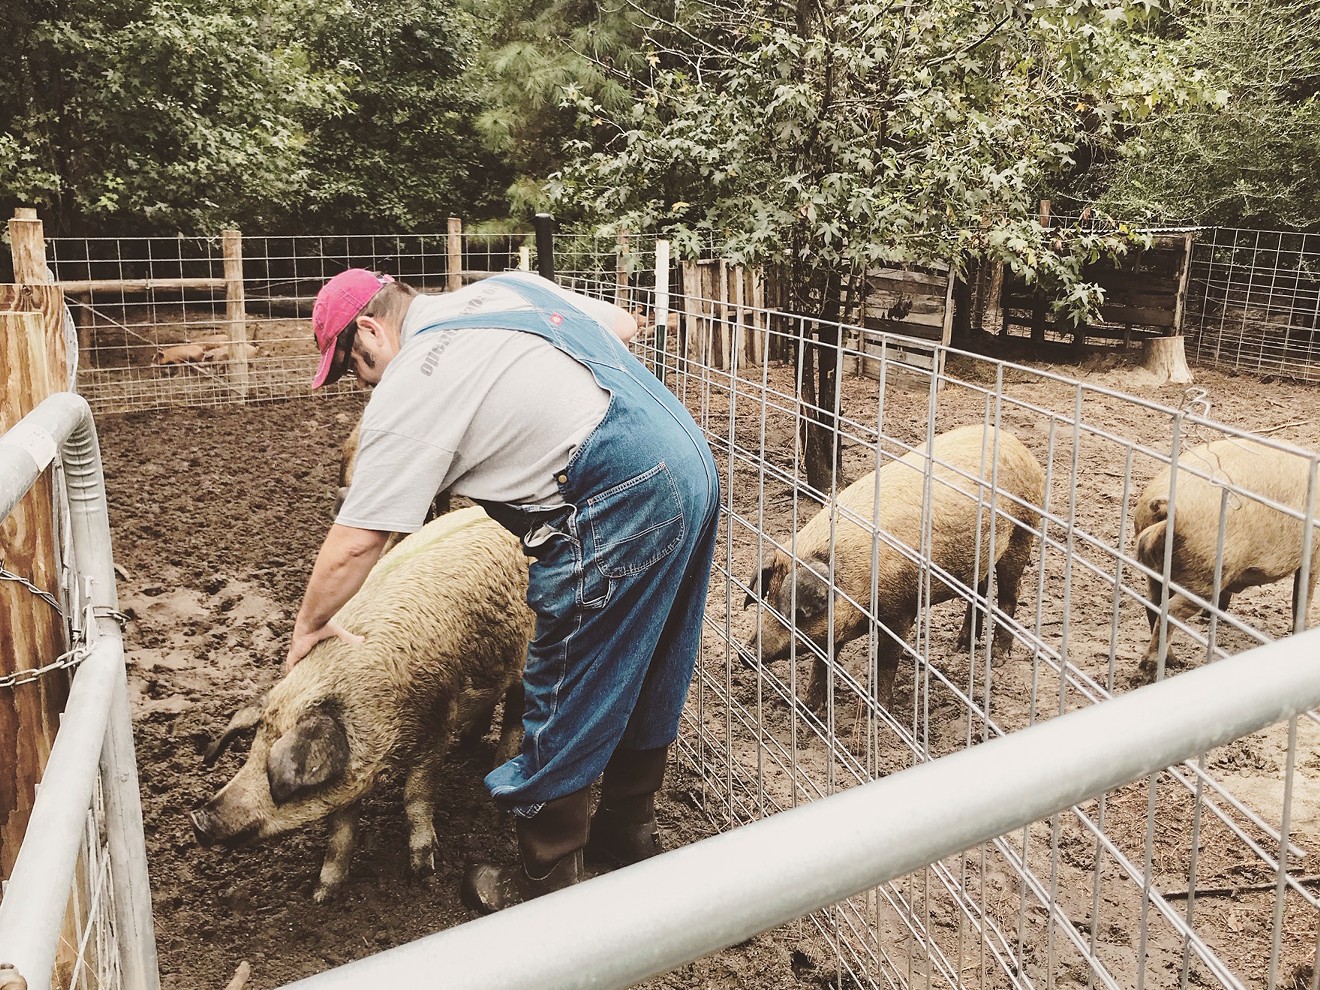 Calvin Medders works with the animals on Chubby Dog Farm, which he and his wife, Karyn, own and operate.